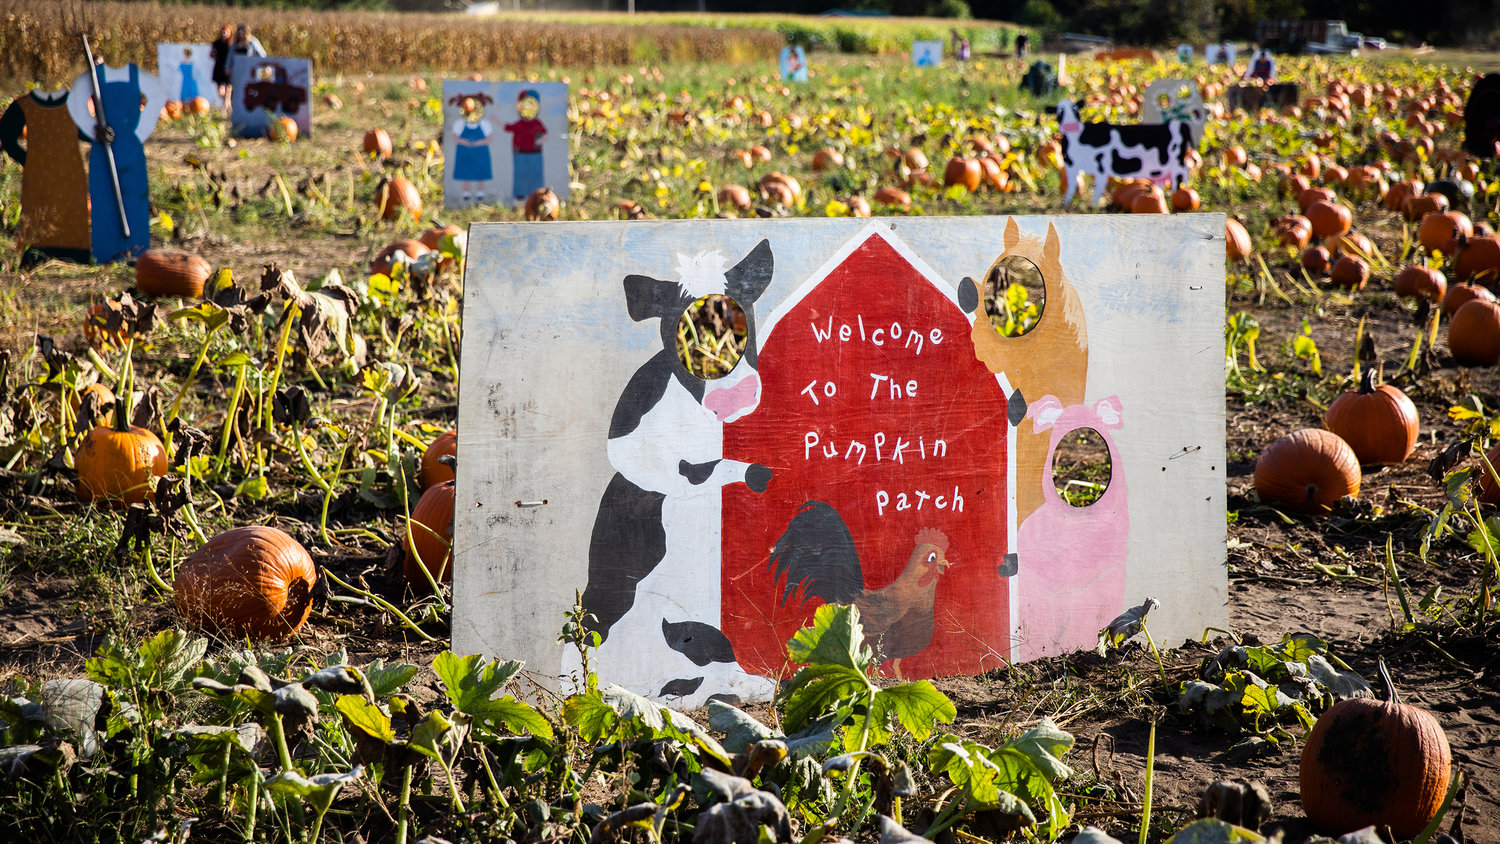 Signage welcomes visitors to the Goodrich Road Pumpkin Patch in Centralia on Monday.